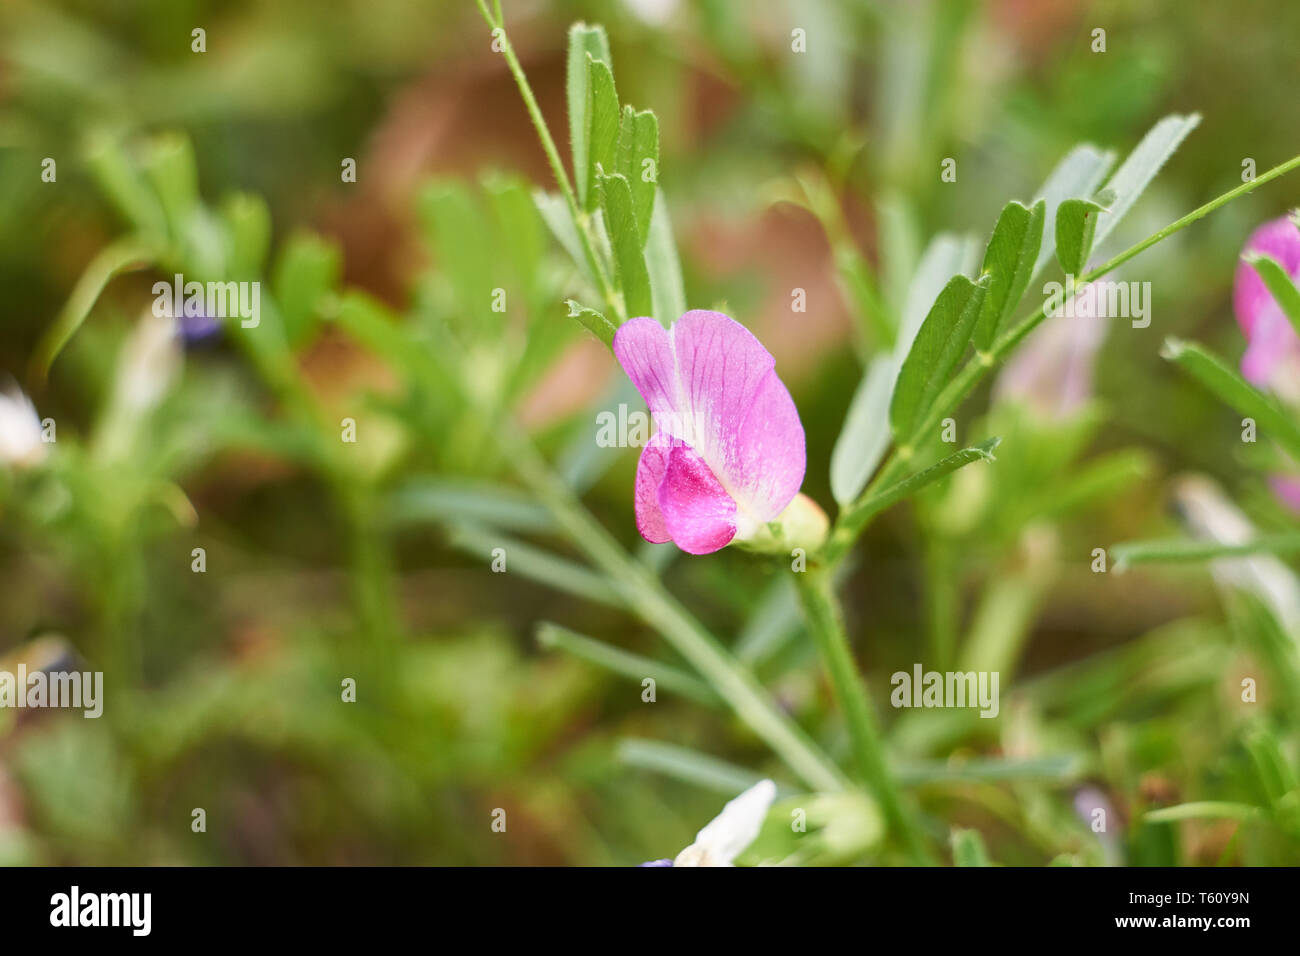 A close up shot of a Japanese vetch (Vicia angustifolia) flower growing in a park. Stock Photo